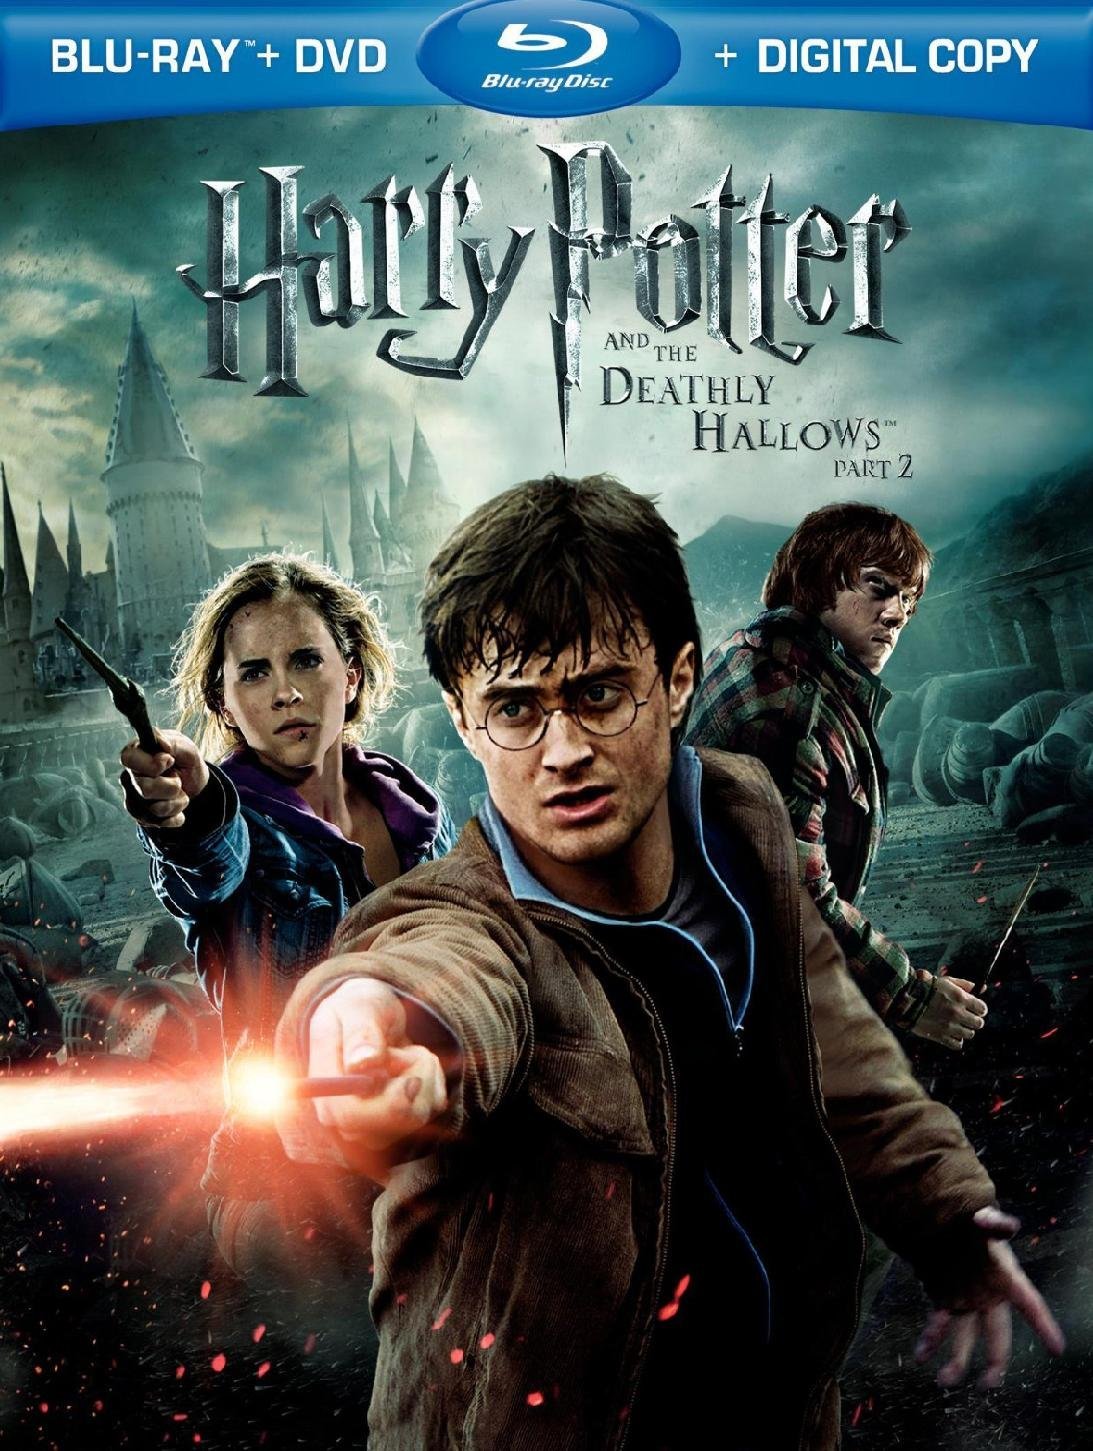 Harry Potter and the Deathly Hallows for ipod download